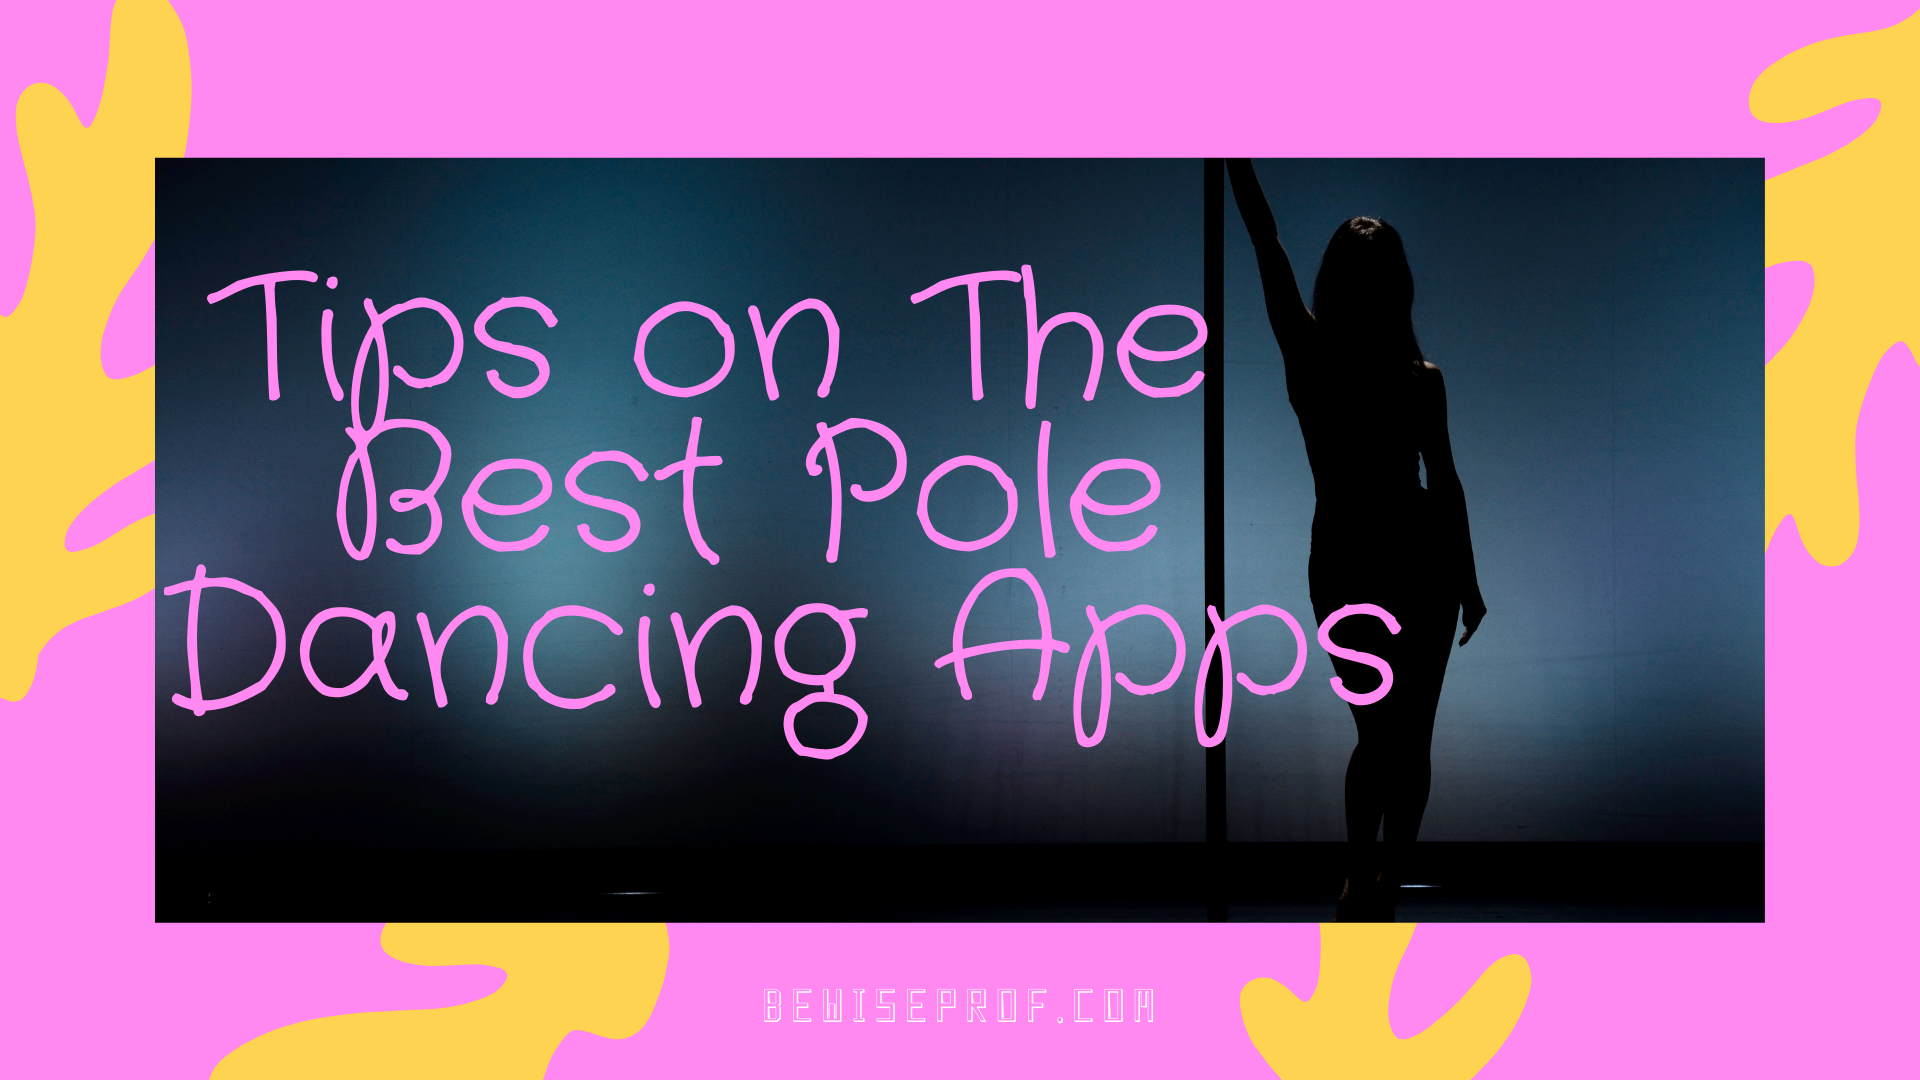 Tips on the Best Pole Dancing Apps